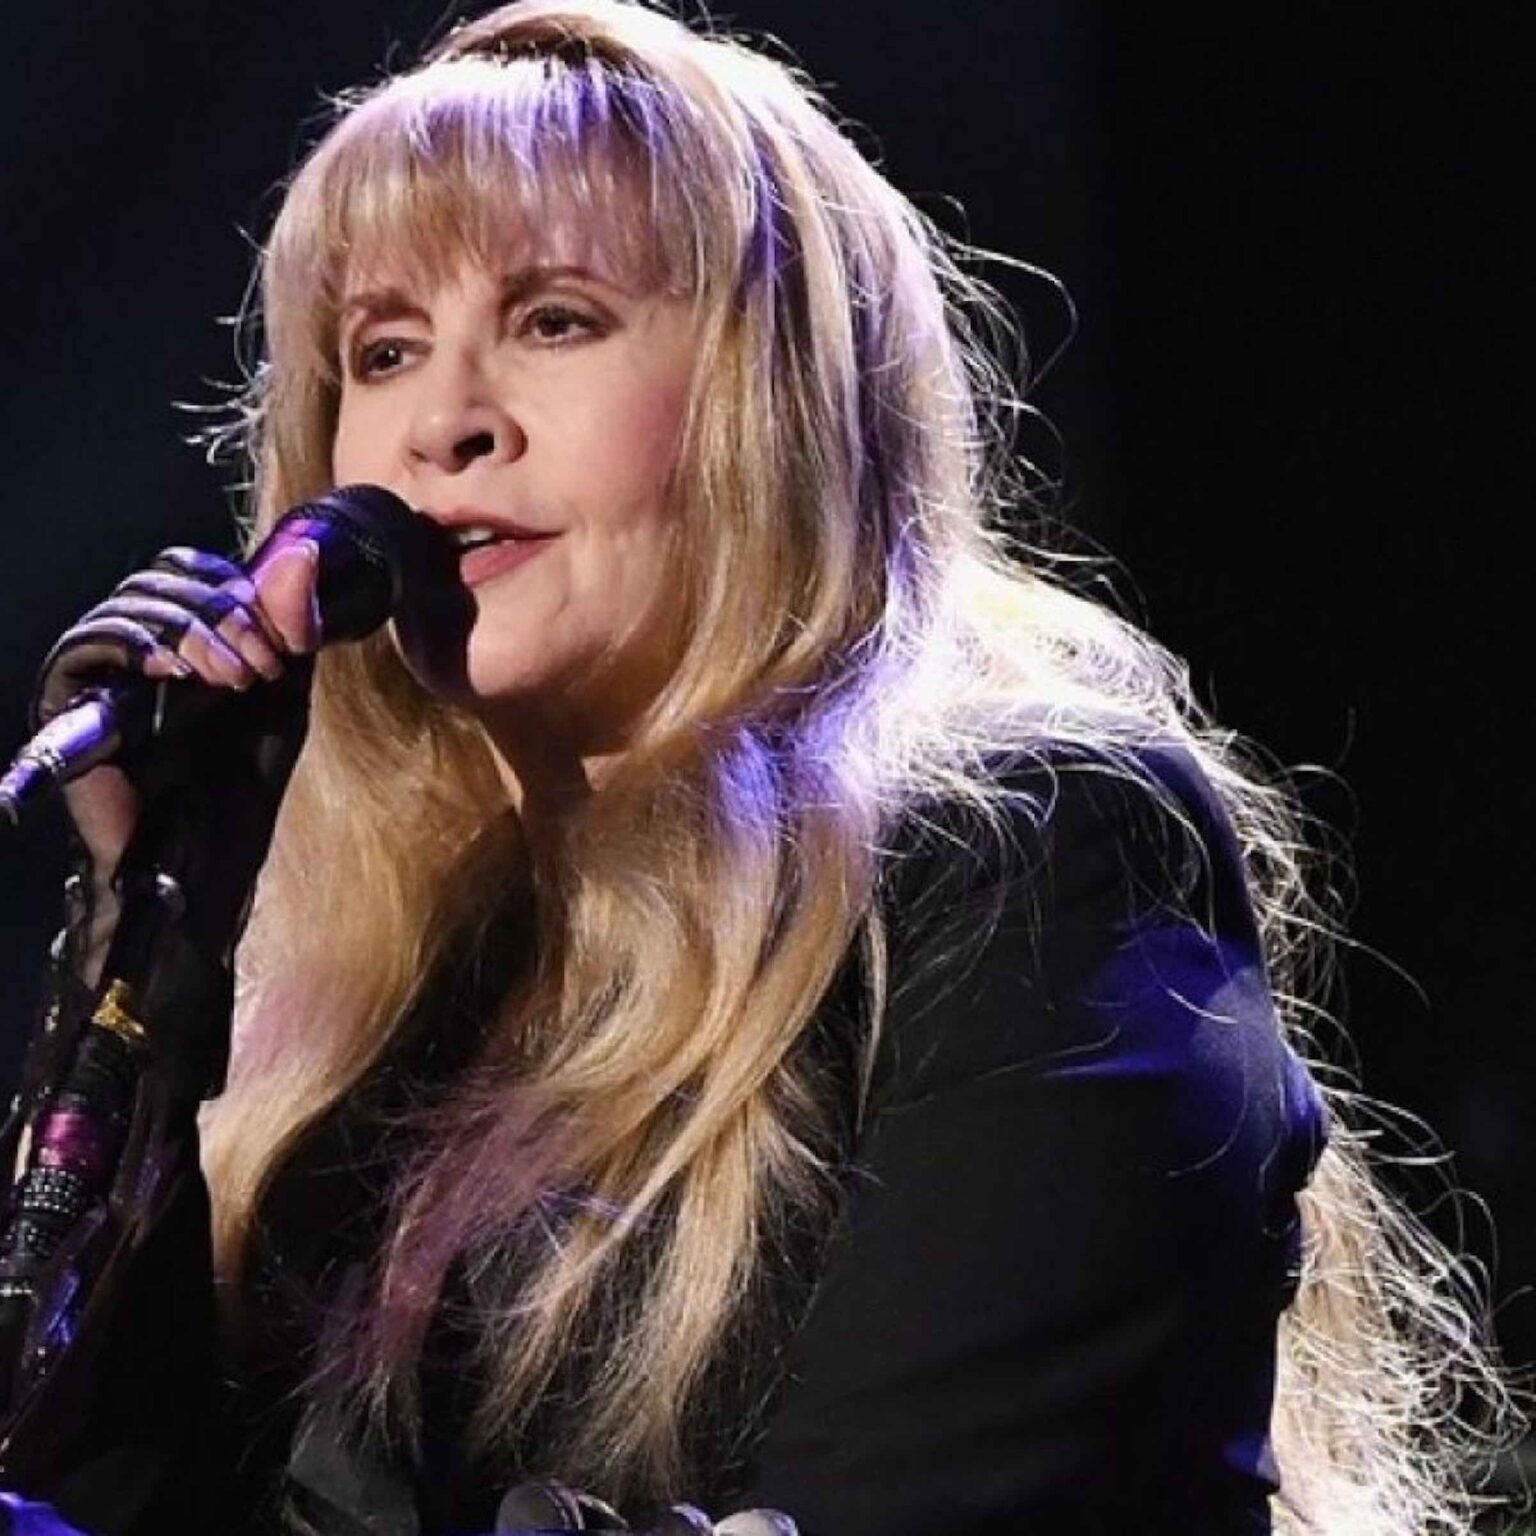 Fleetwood Mac’s Stevie Nicks announced that her concerts for 2021 are cancelled. Get ready to retweet and dive into the reactions to the news on Twitter!